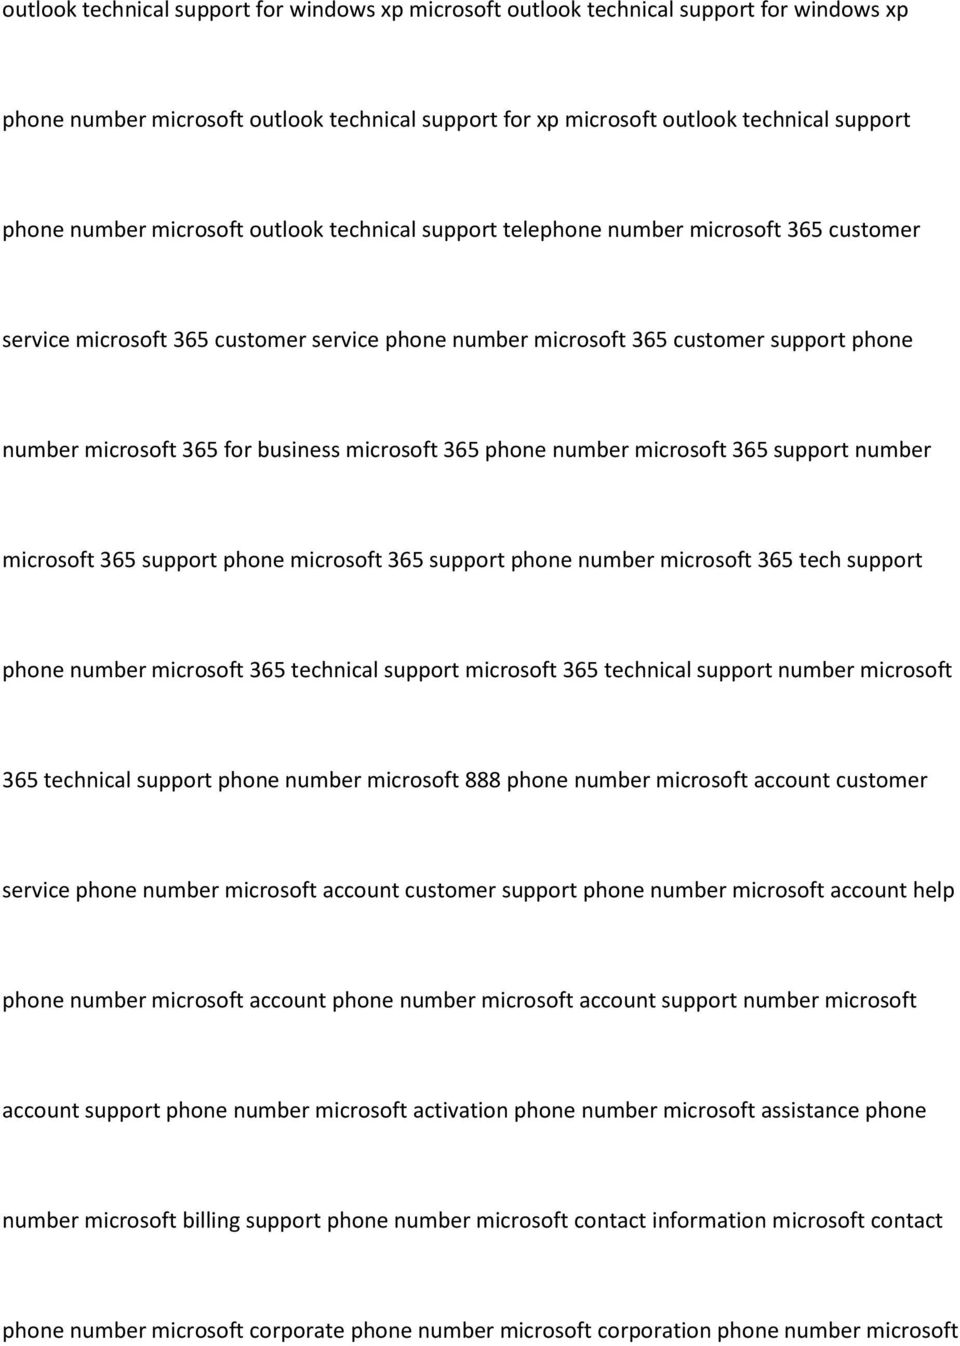 microsoft 365 phone number microsoft 365 support number microsoft 365 support phone microsoft 365 support phone number microsoft 365 tech support phone number microsoft 365 technical support